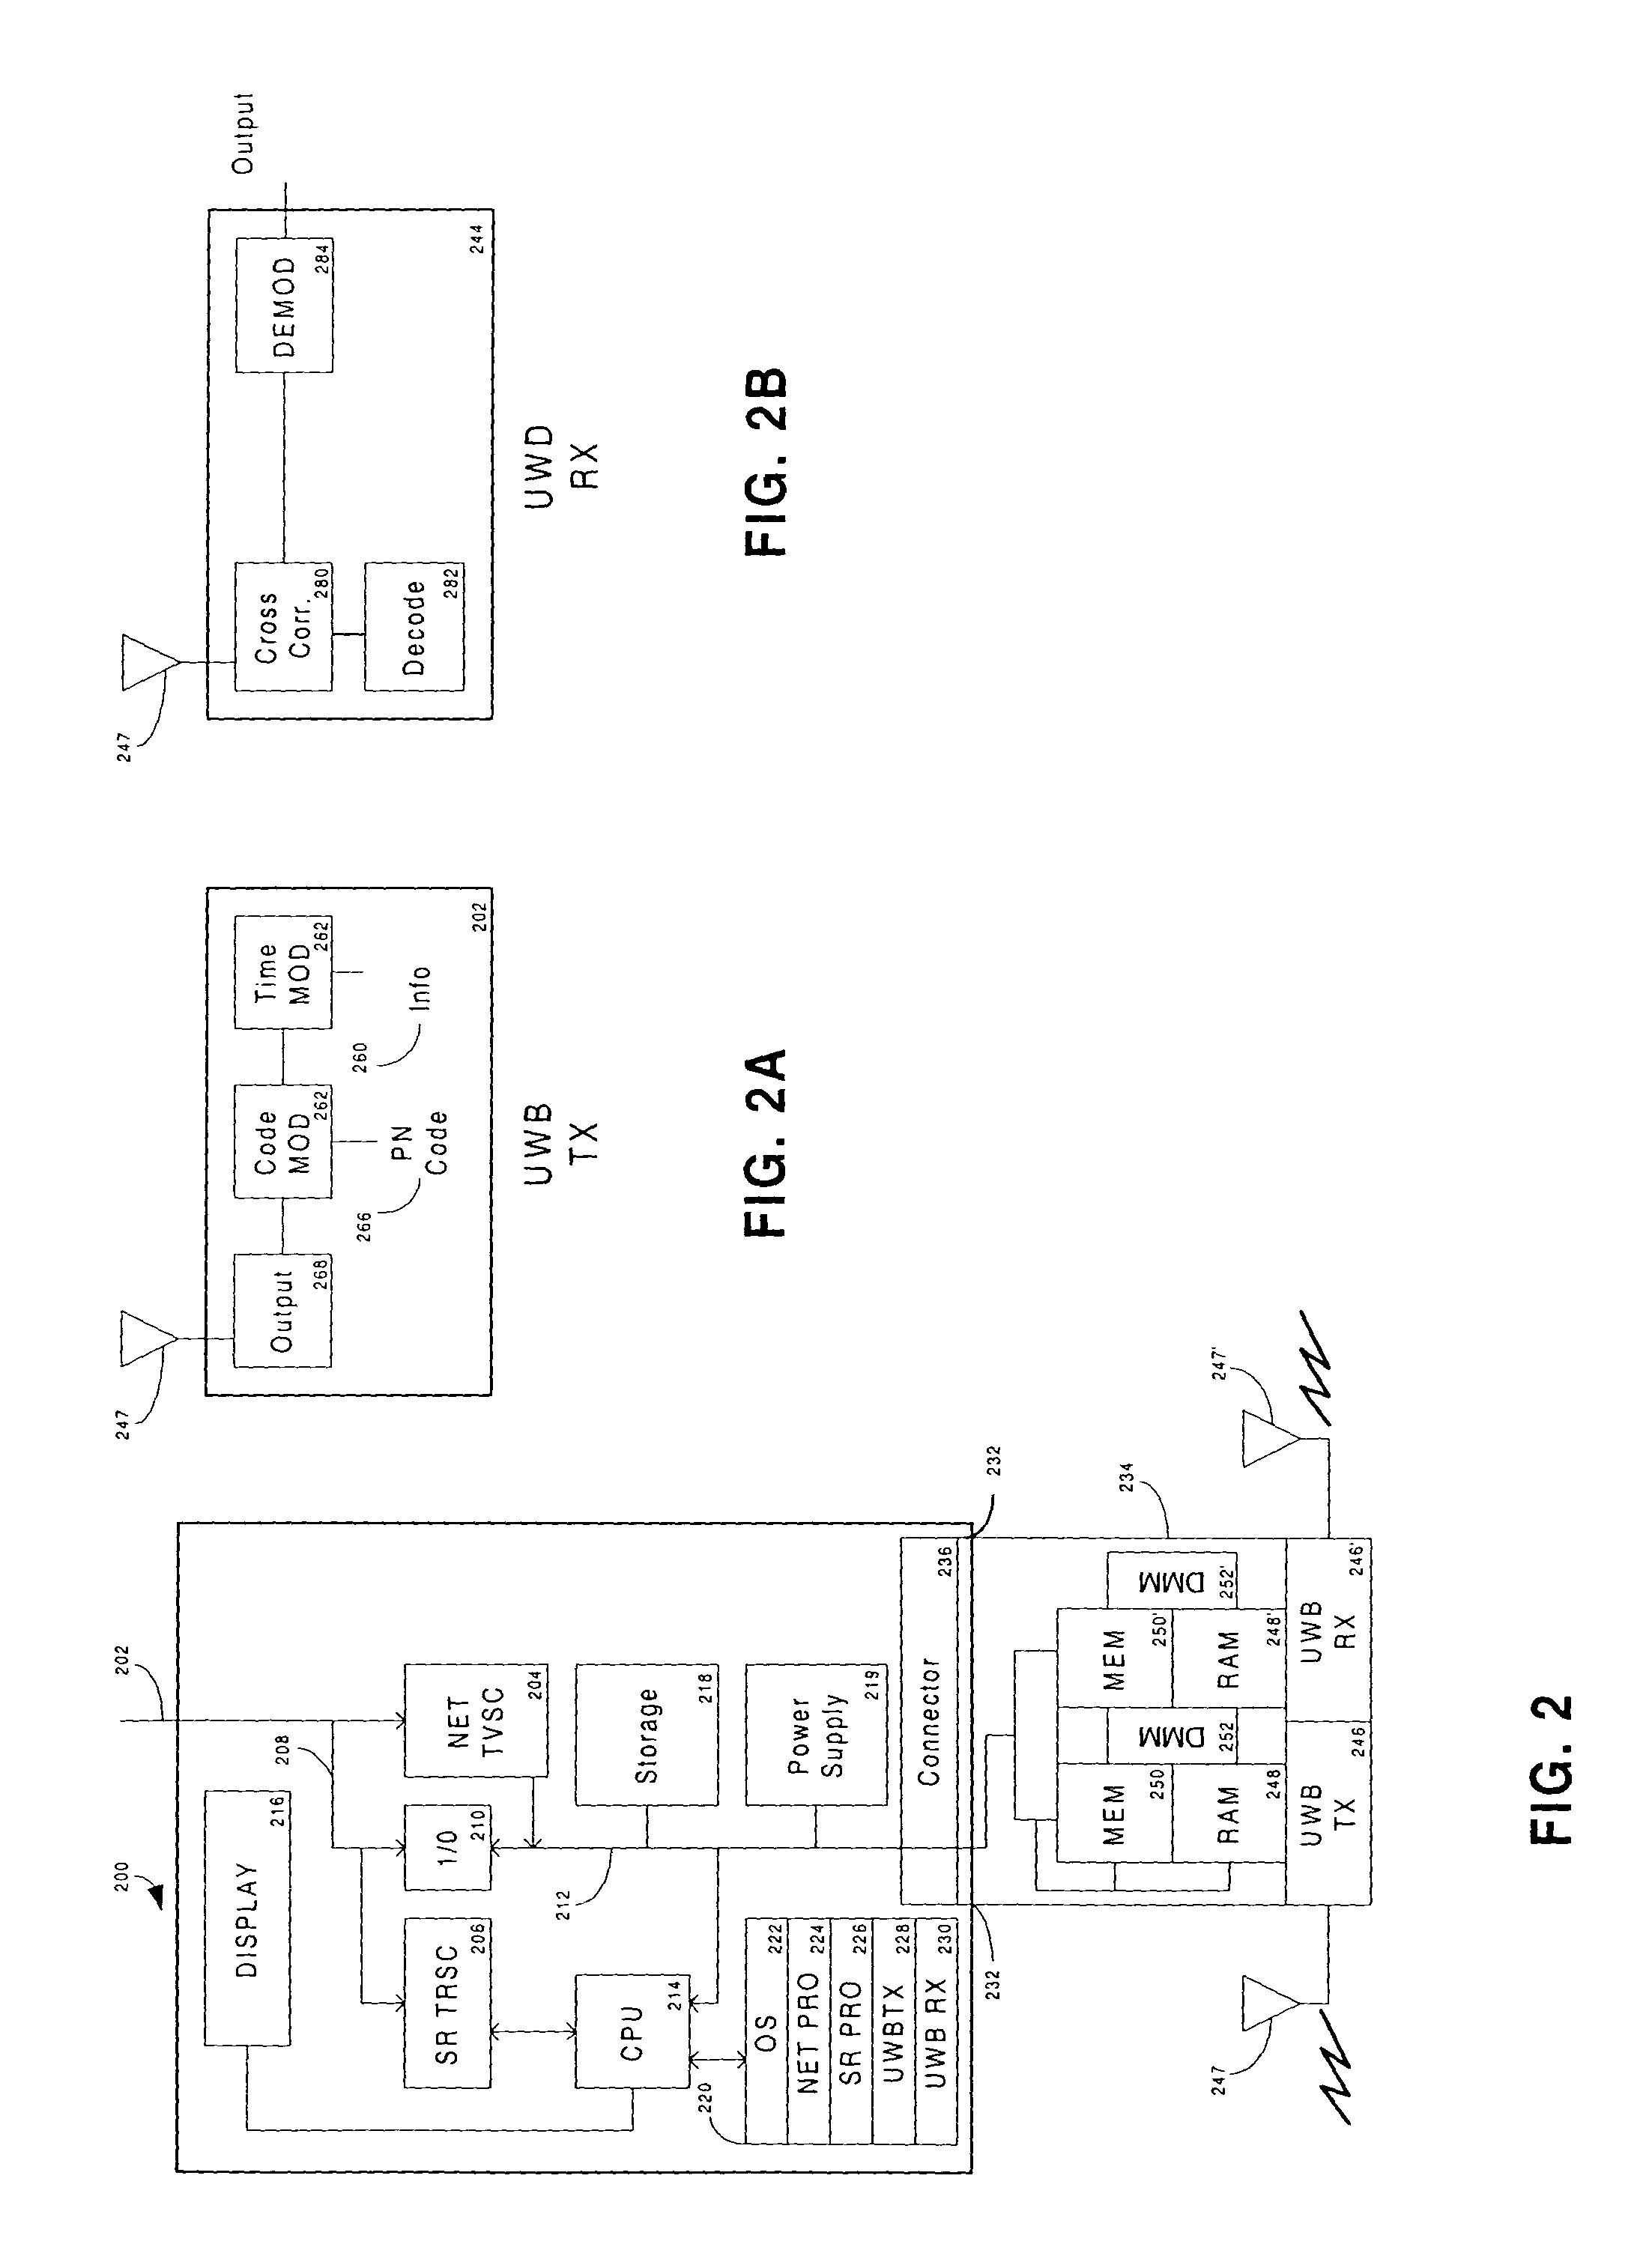 Ultra-wideband/low power communication having a dedicated removable memory module for fast data downloads—apparatus, systems and methods